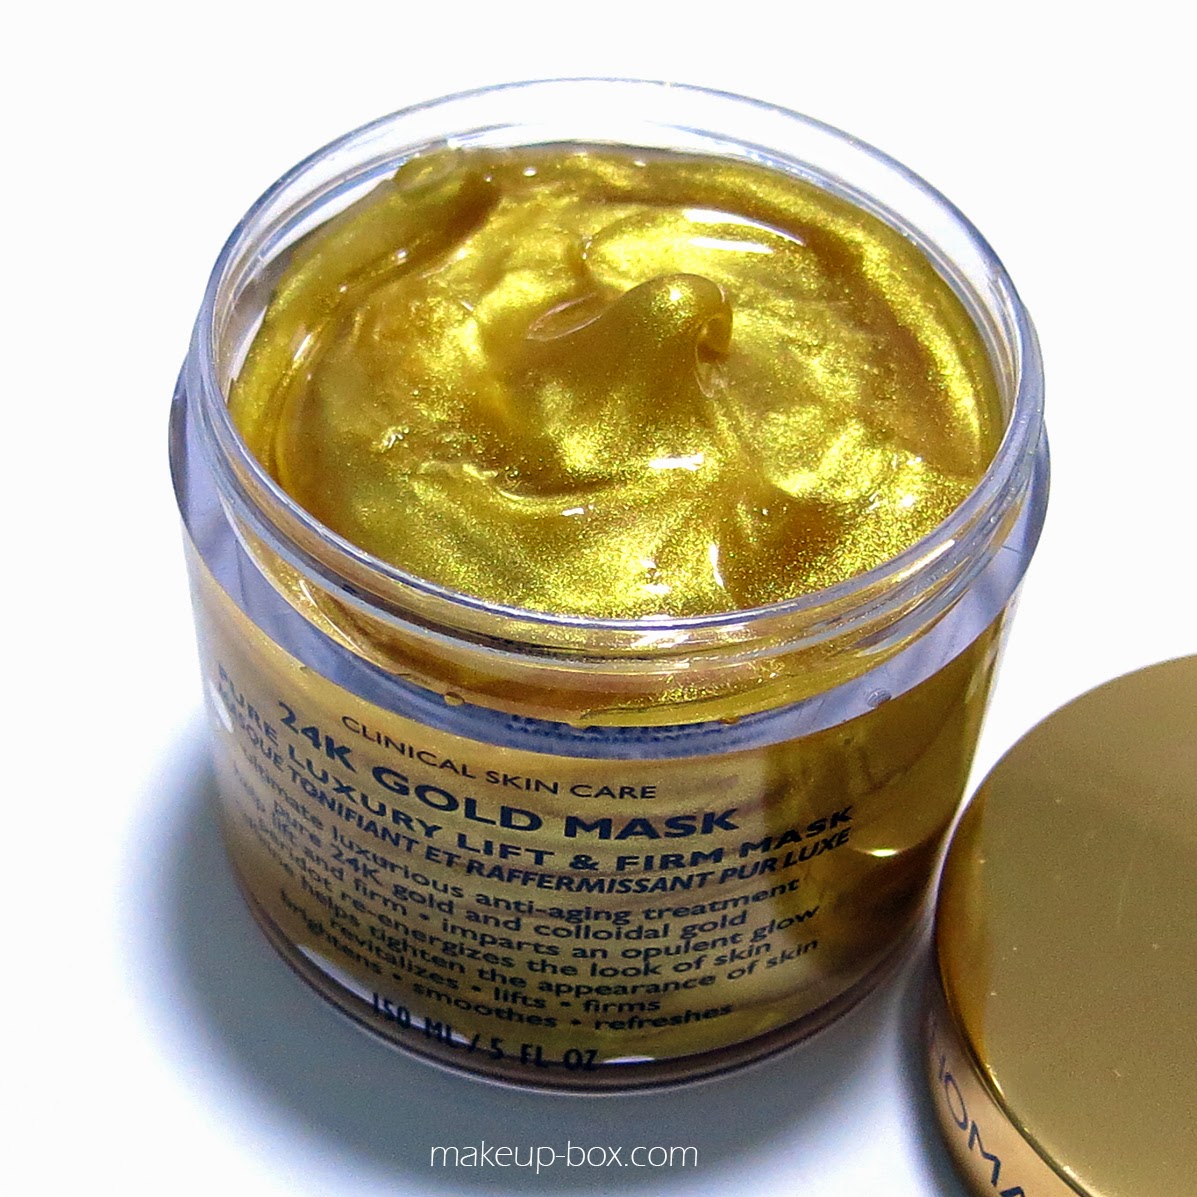 The Makeup Box: Peter Thomas Roth 24K Gold Mask Pure Luxury Lift & Firm ...